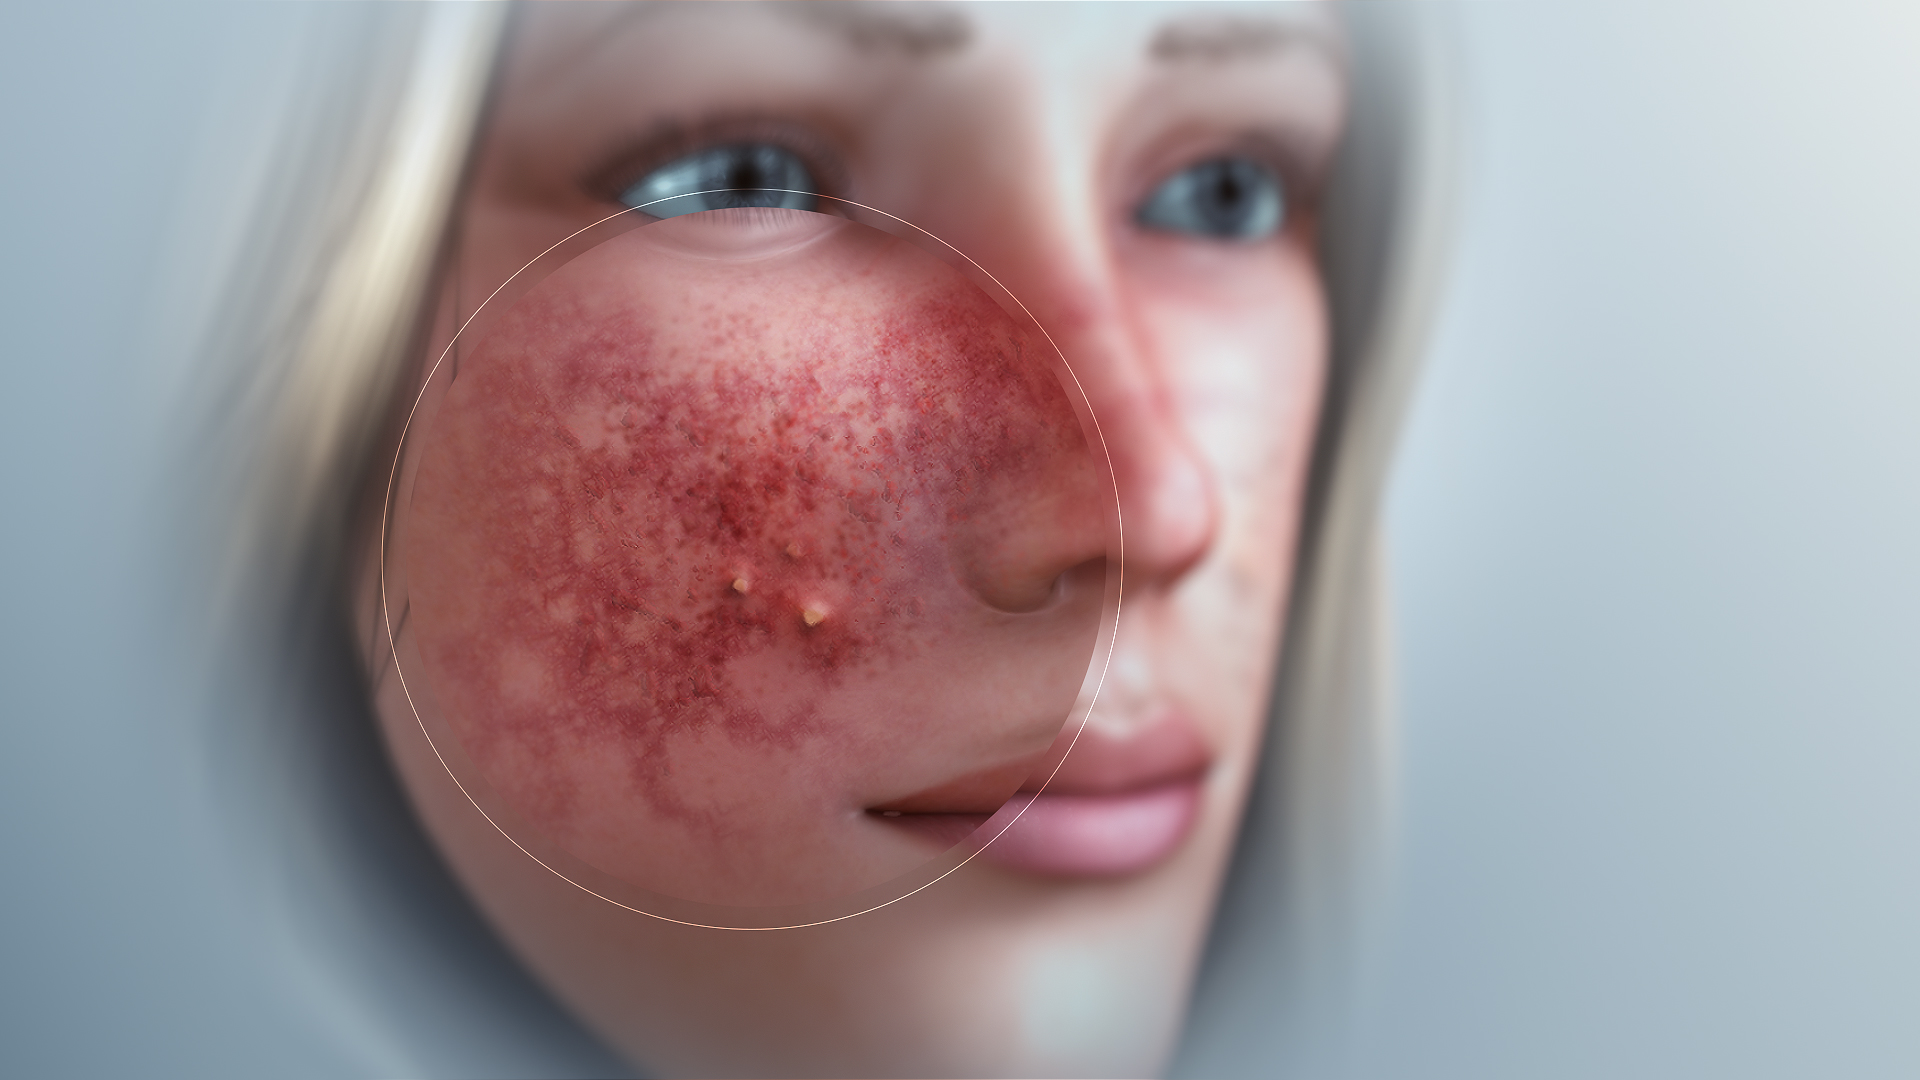 3D Medical Animation still of Rosacea infected face